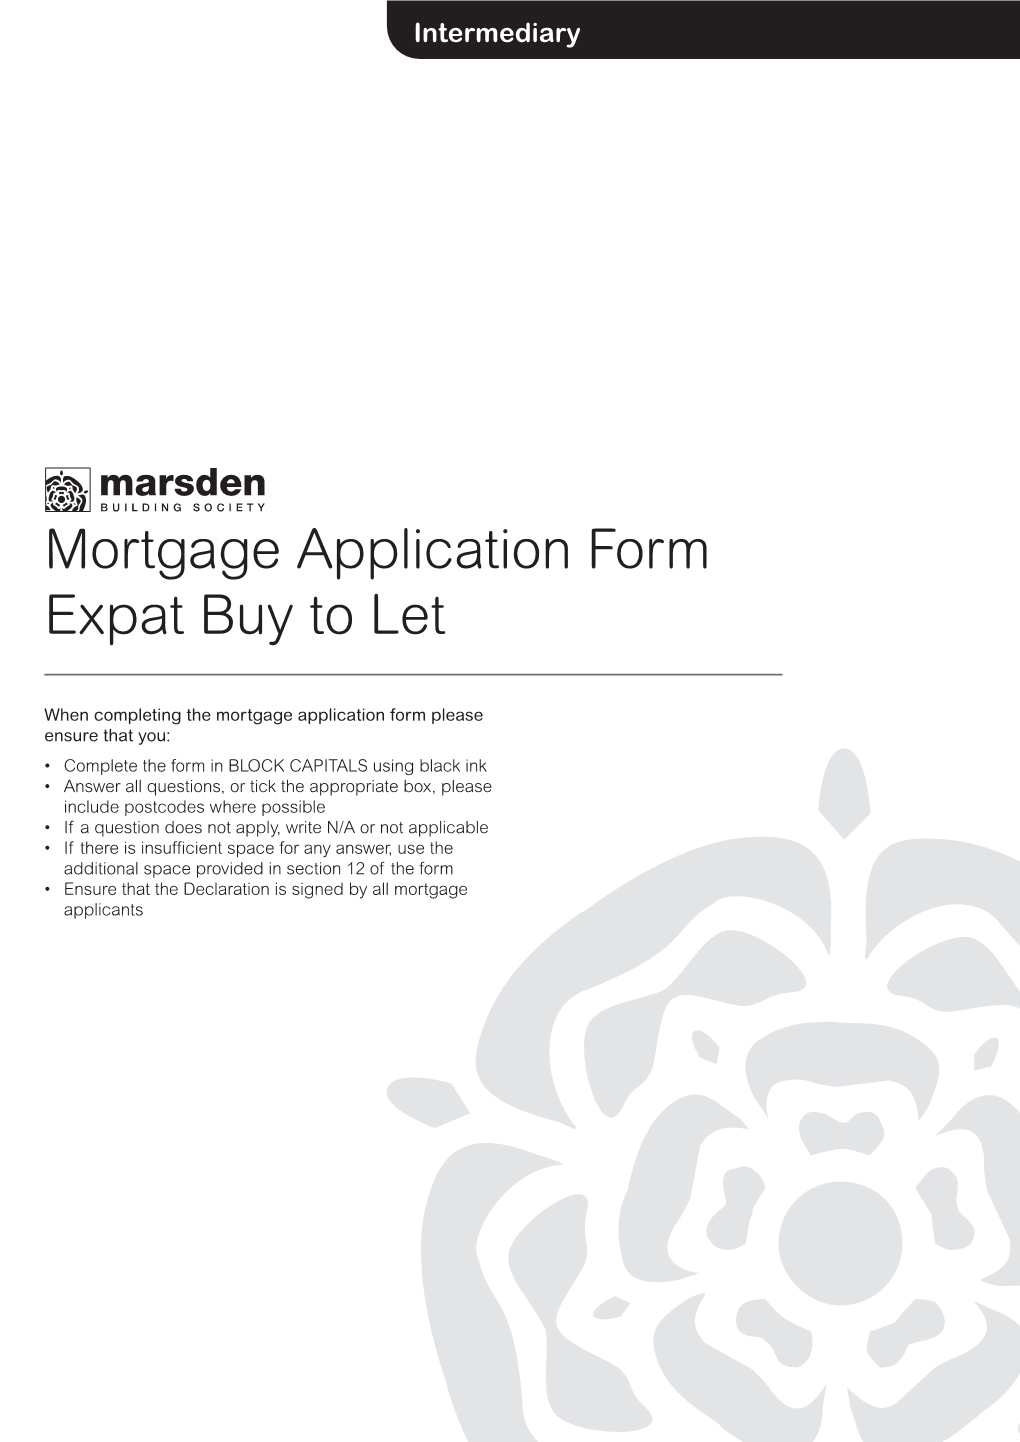 Mortgage Application Form Expat Buy to Let